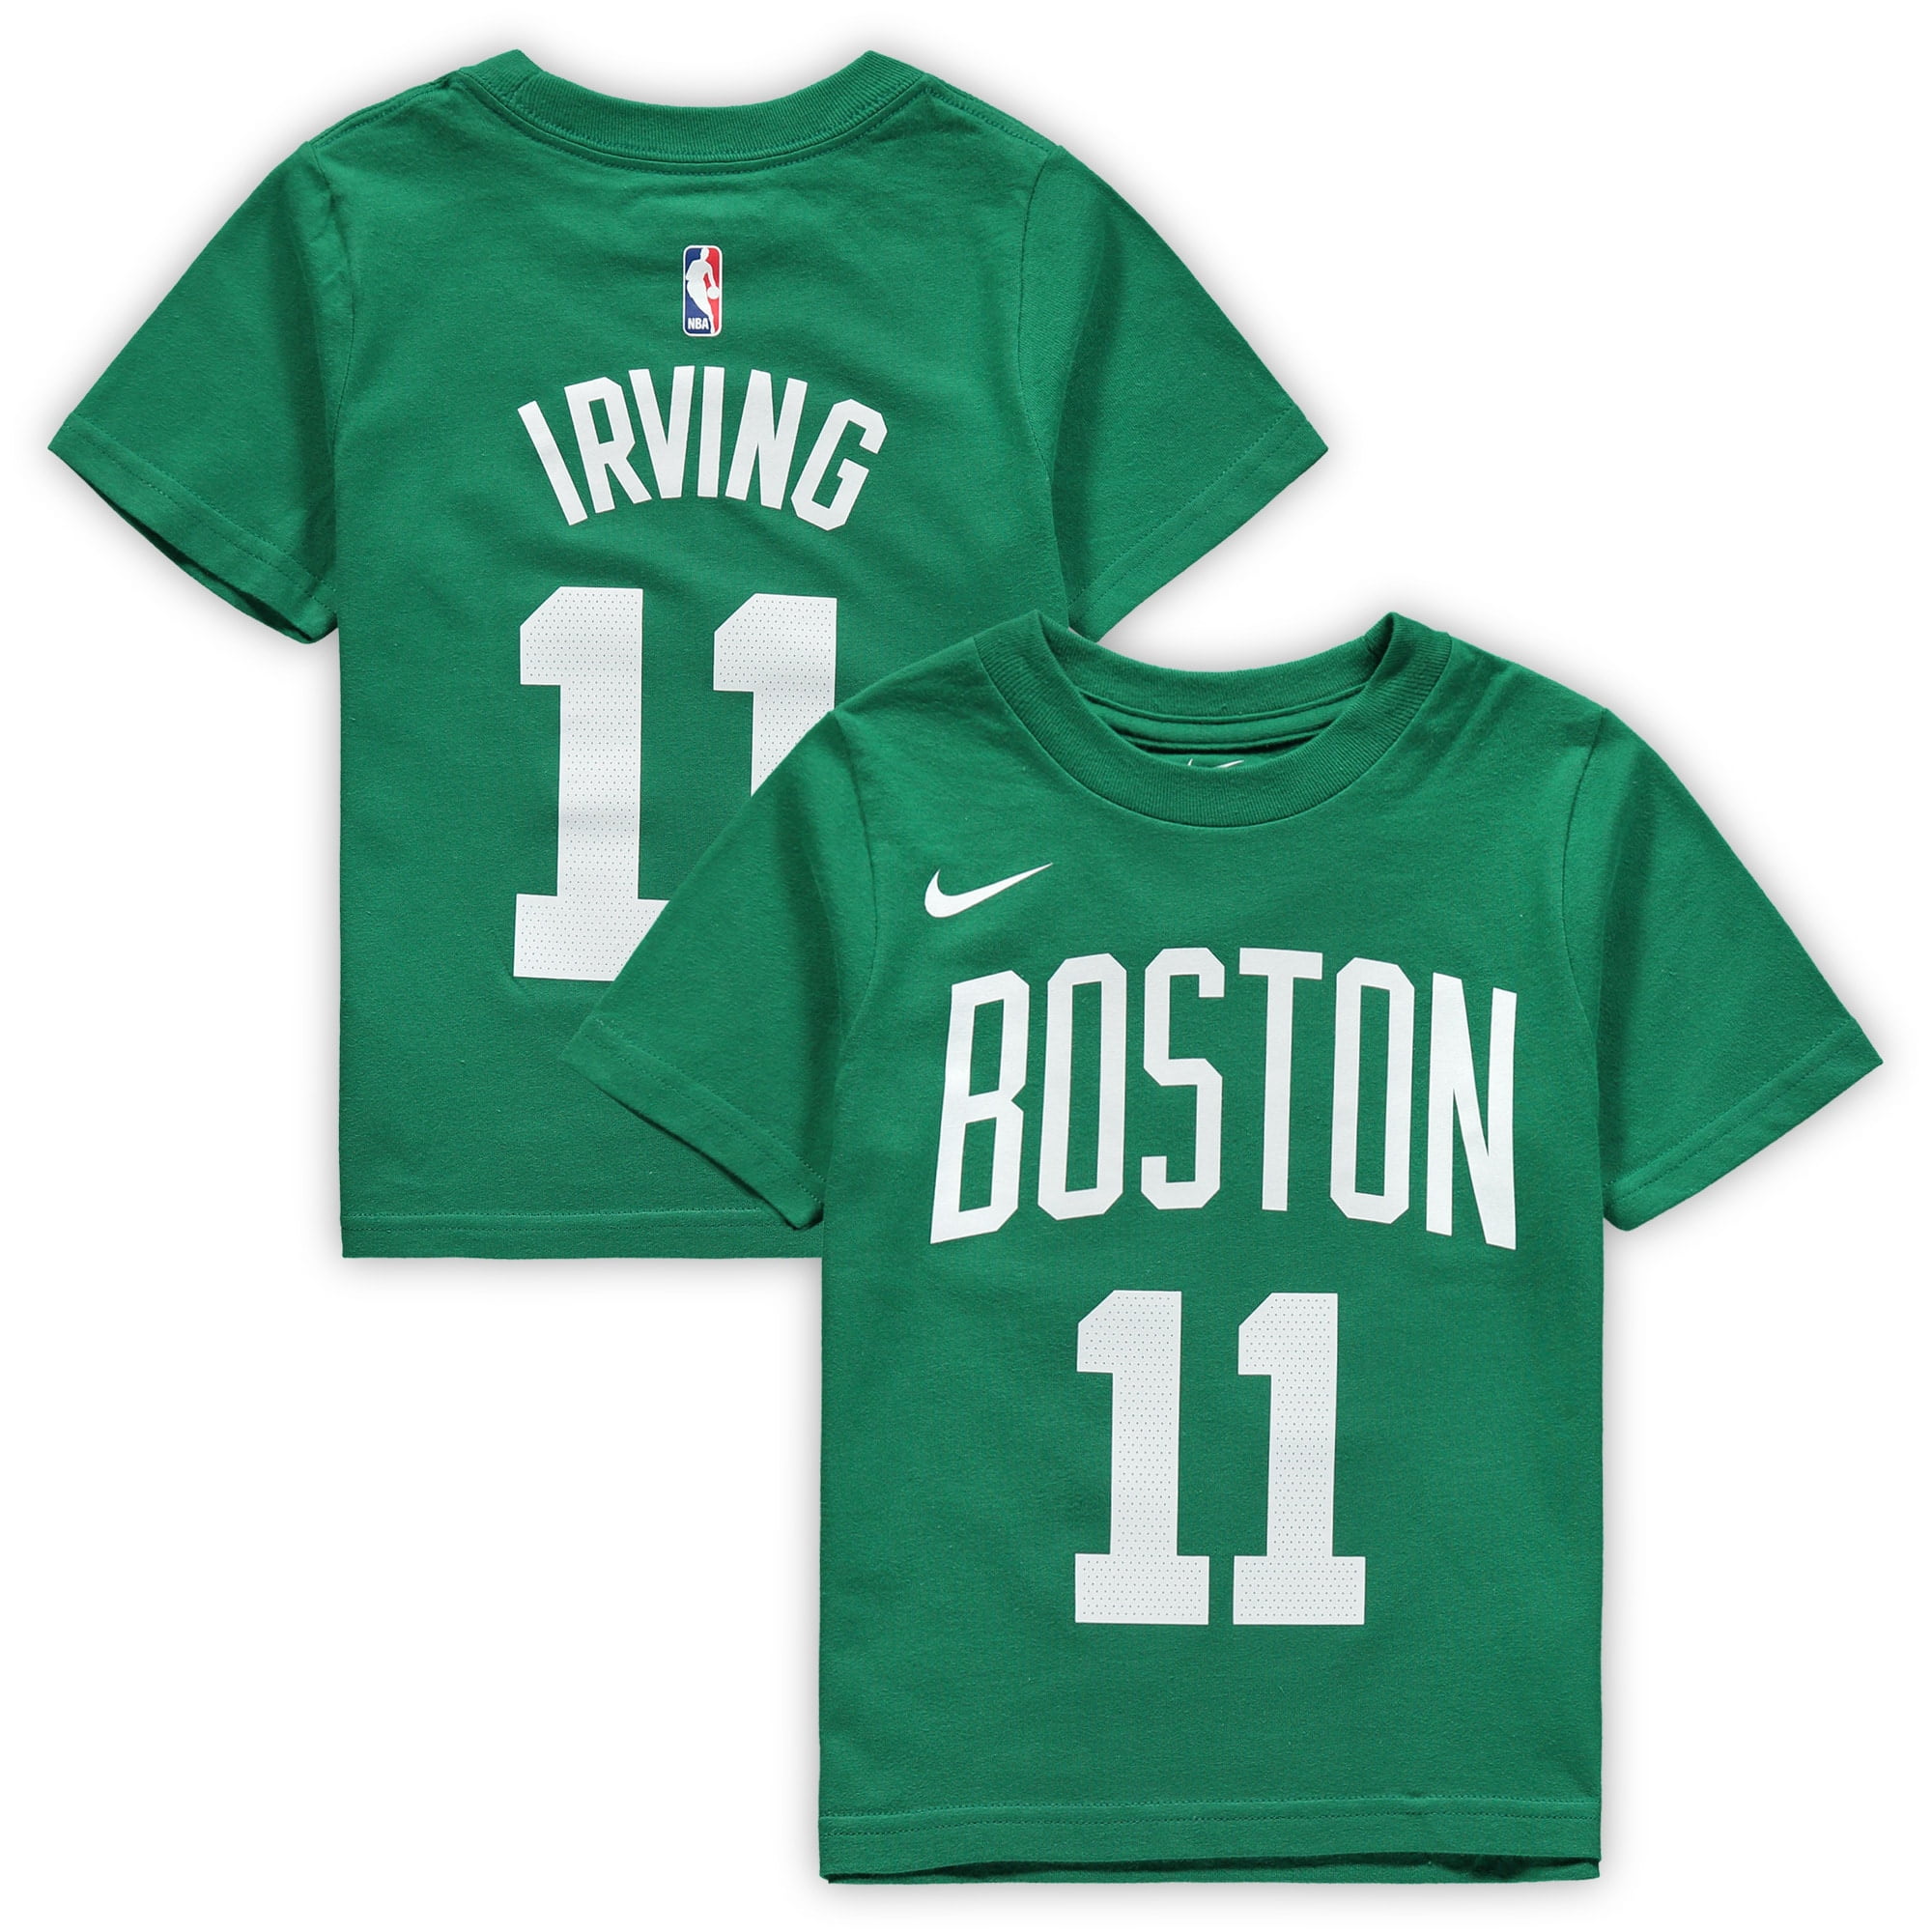 kyrie irving toddler jersey